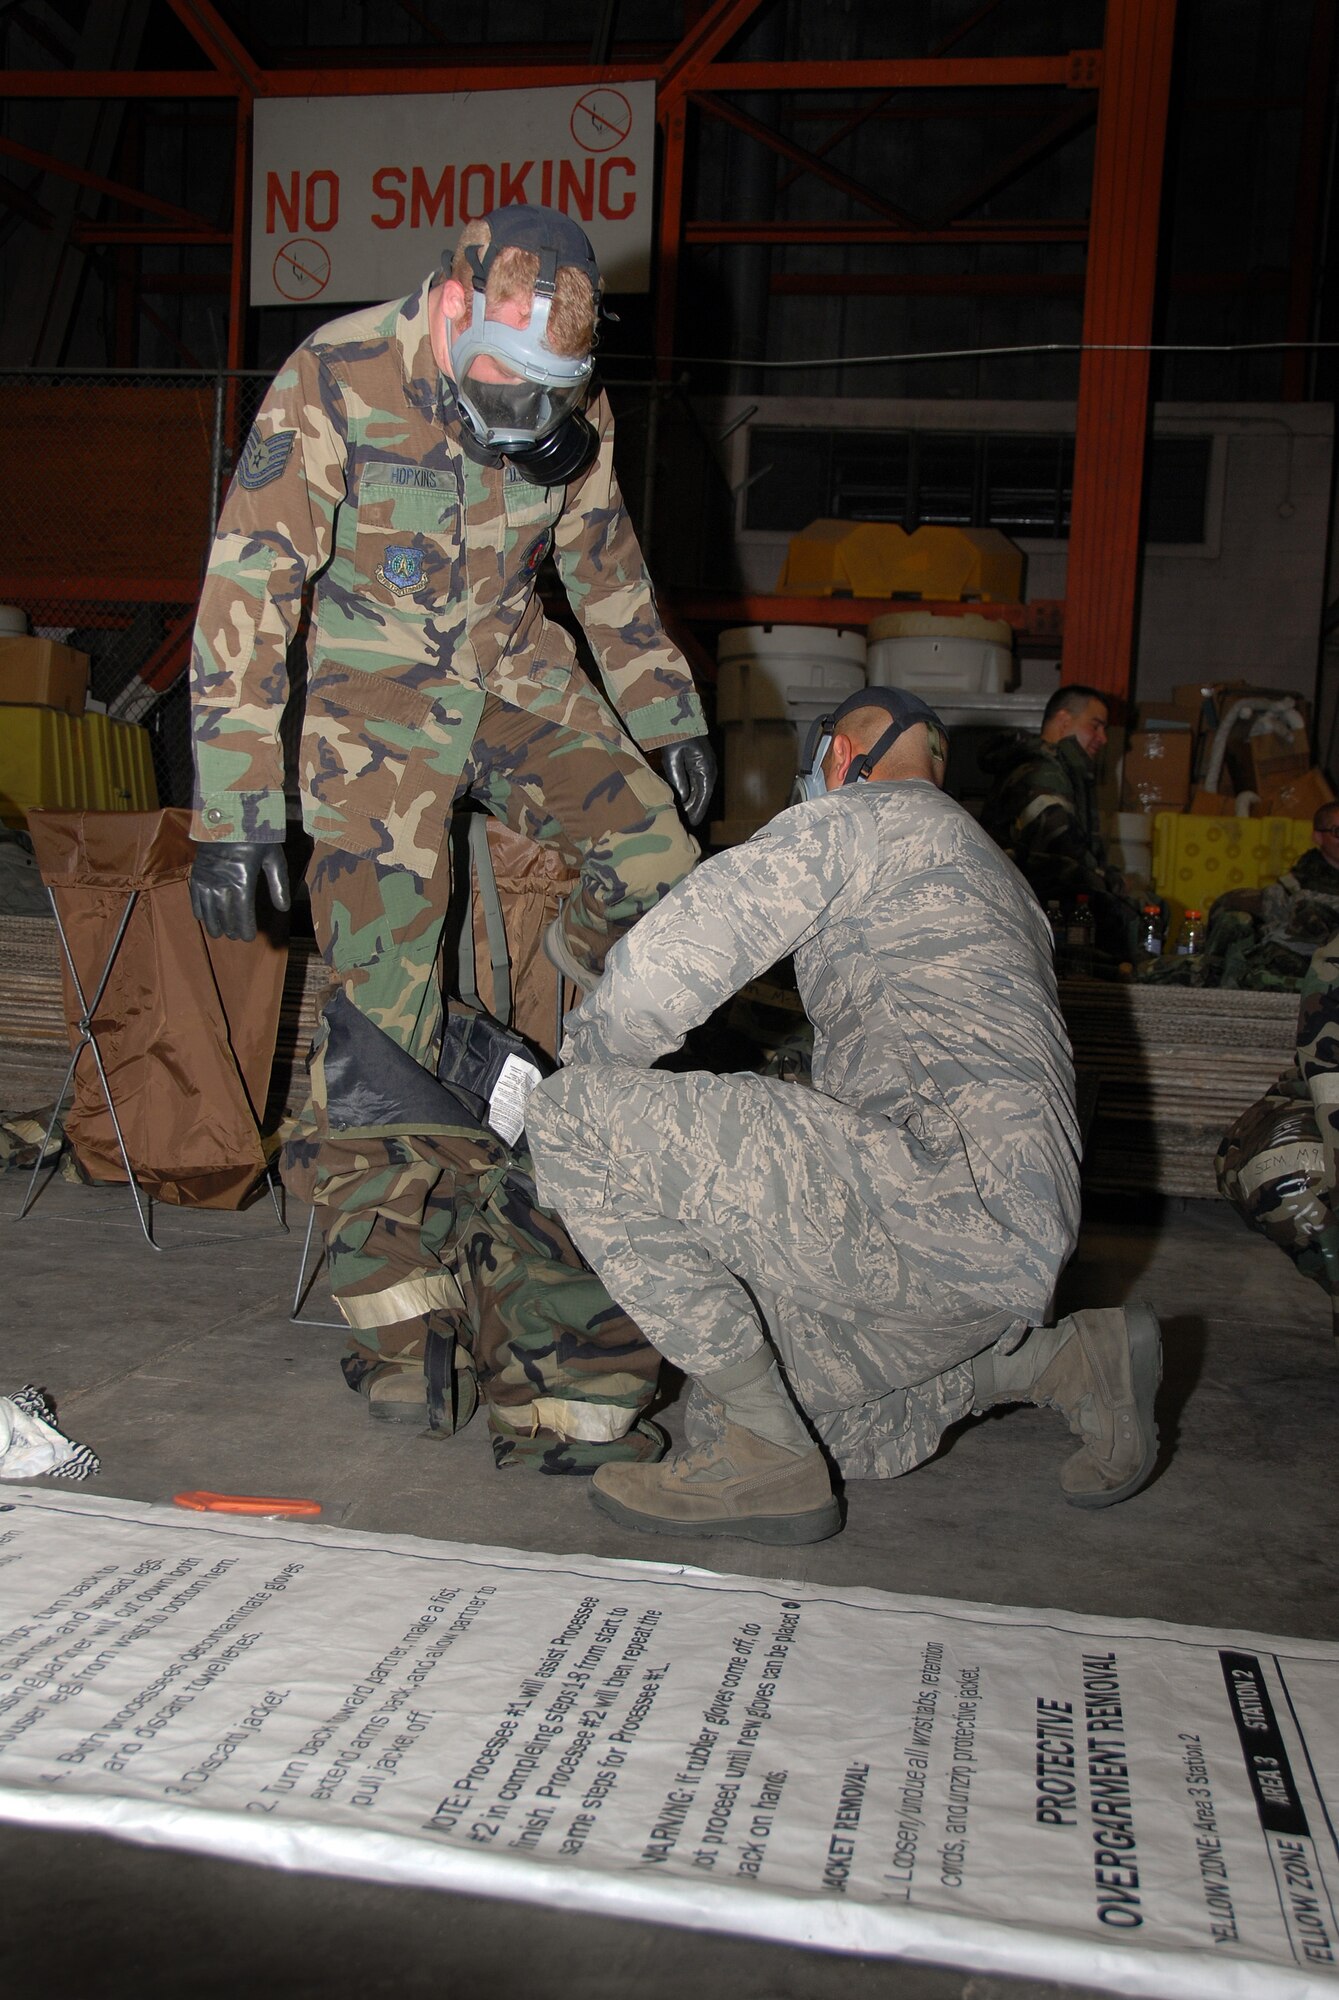 Two members of the 137th Space Warning Squadron remove outer protective garments during their annual Chemical, Biological, Radiological, Nuclear & Explosives (CBRNE) training June 10, 2009, Ellsworth Air Force Base, South Dakota.  Members of the 137th SWS located in Greeley Colorado, are participating in several training events to include CBRNE while at Ellsworth AFB this week to further enhance their one of a kind worldwide capable mission as a missile warning , space launch and detection mobile unit. (U.S Air Force photo by: Tech. Sgt. Wolfram M. Stumpf/Released)